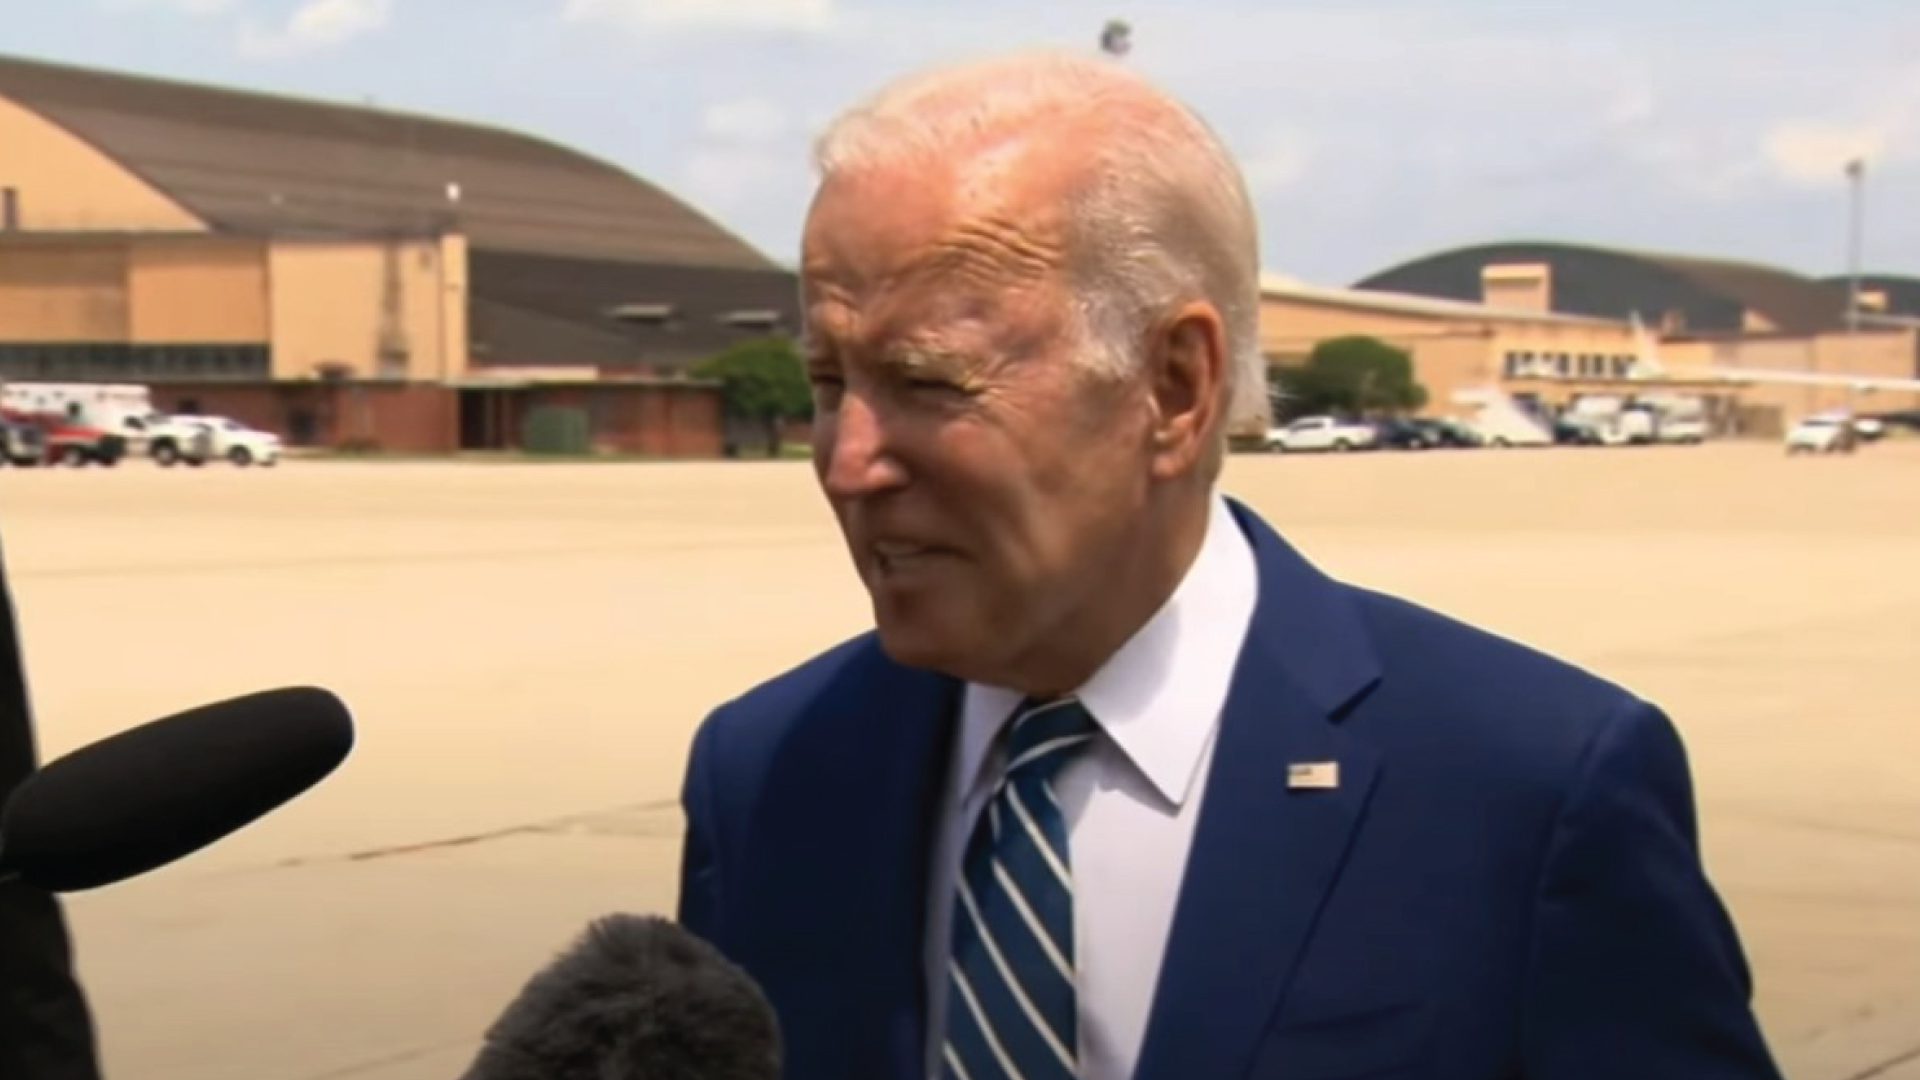 Joe Biden claims Republicans are equally responsible for recent crime waves.